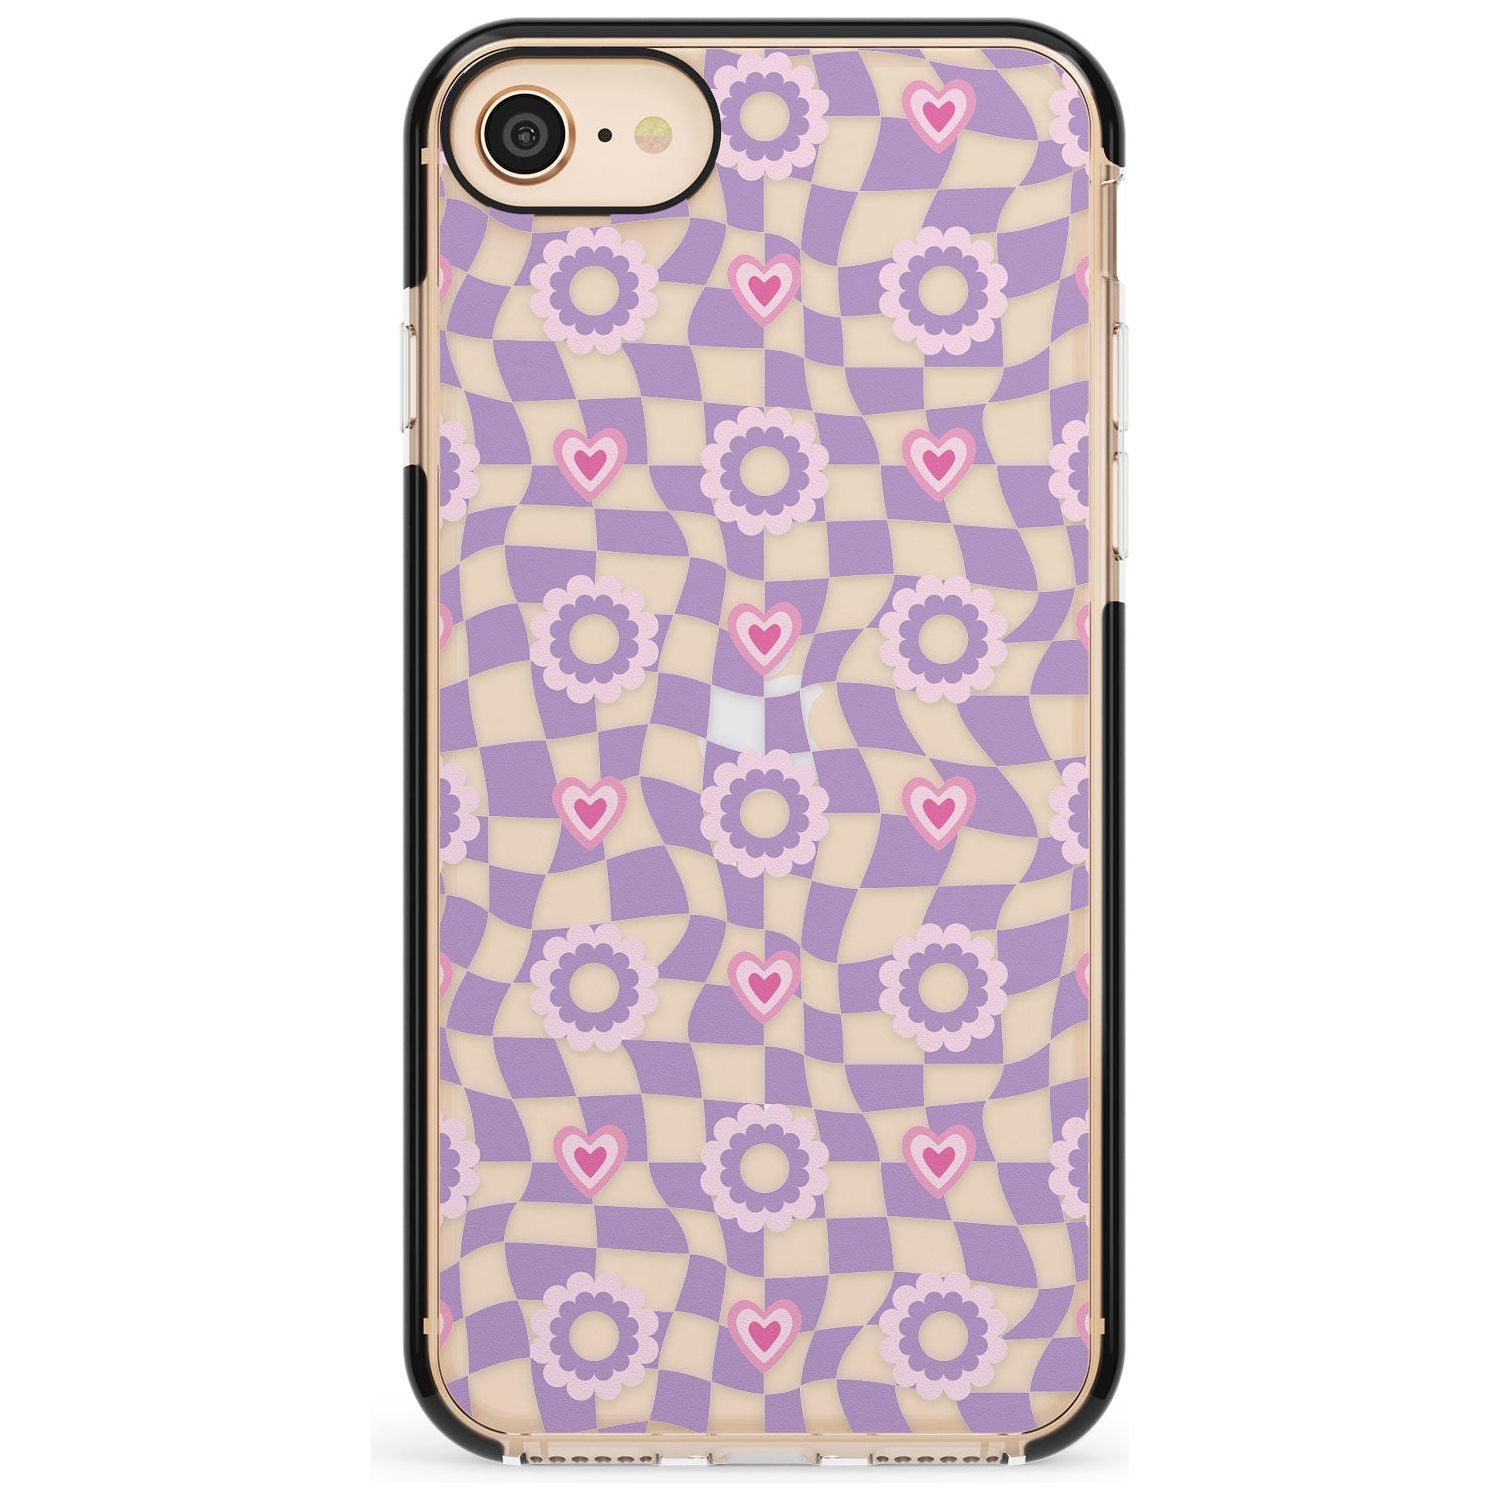 Checkered Love Pattern Black Impact Phone Case for iPhone SE 8 7 Plus